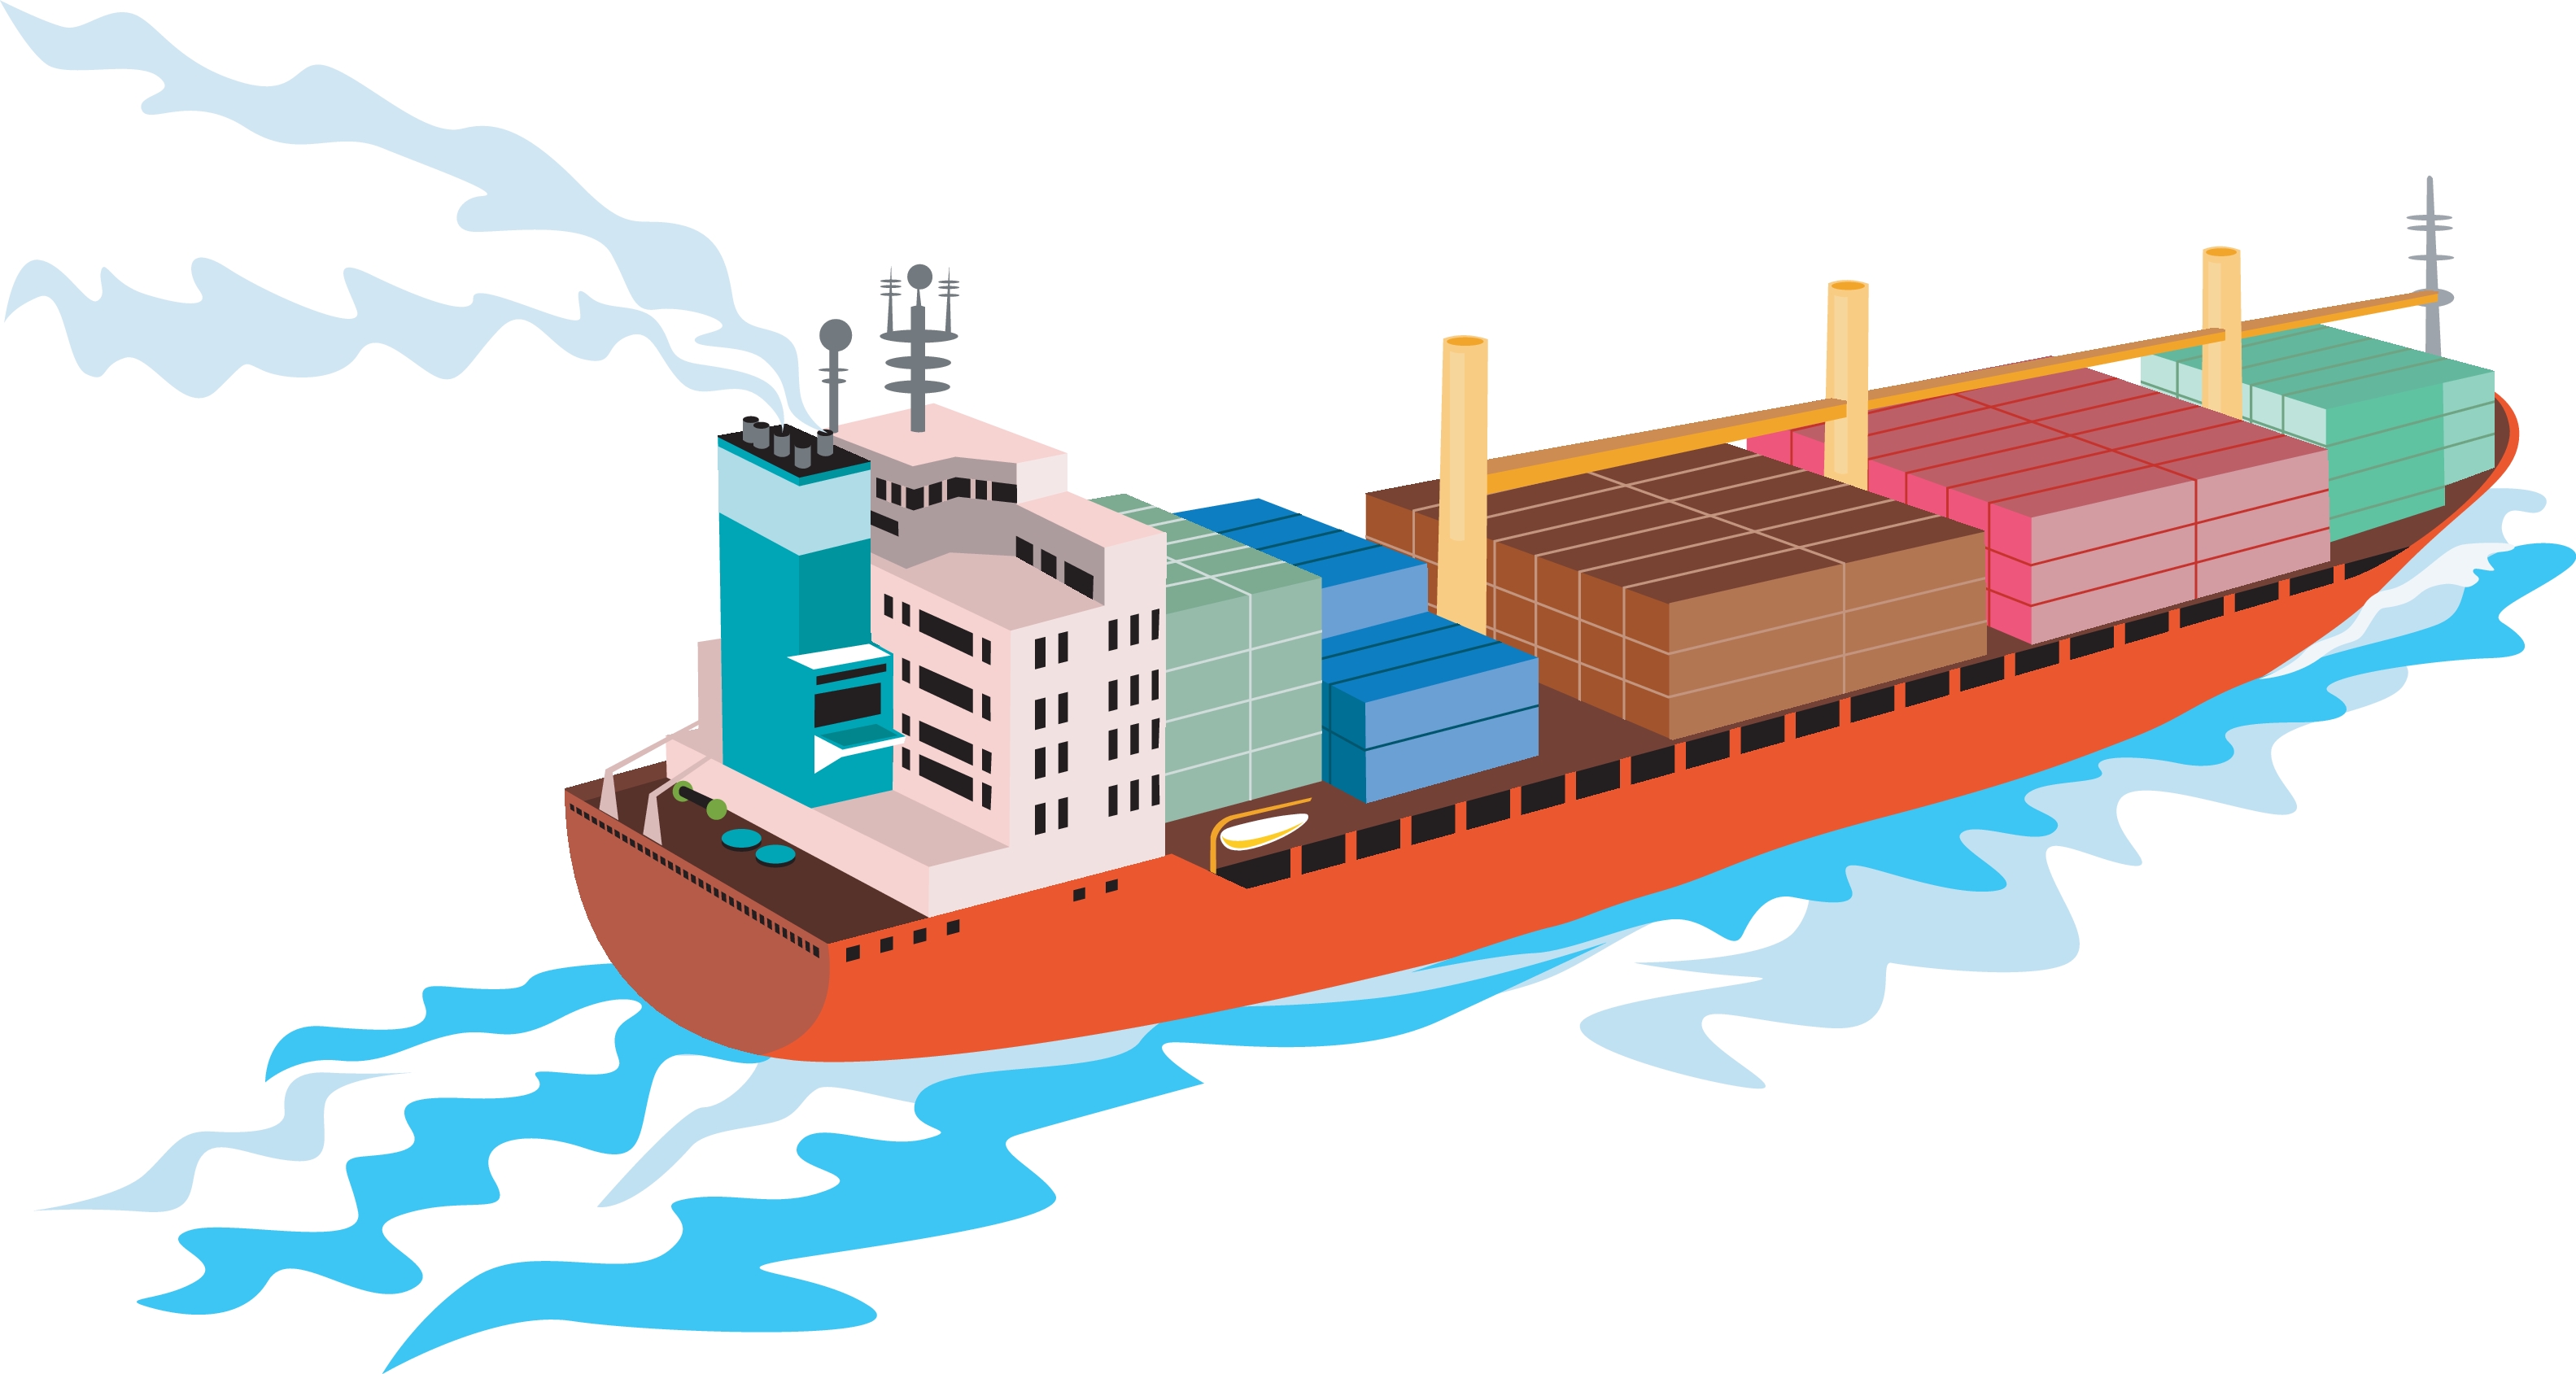 Creating eco-engines for sustainable shipping | News | UiB